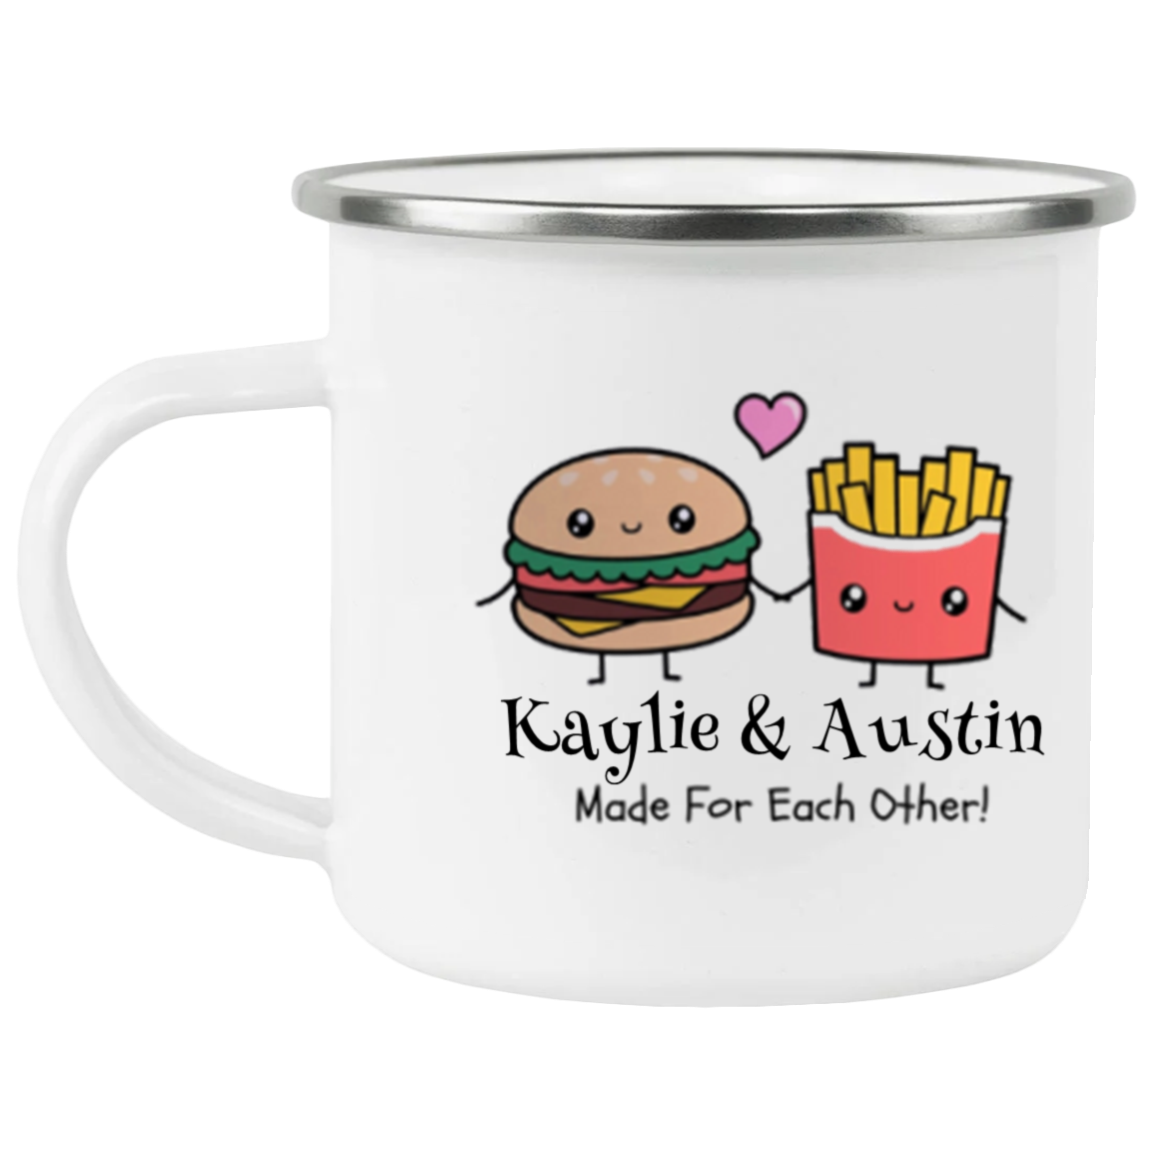 Made for Each Other Personalized  Mug